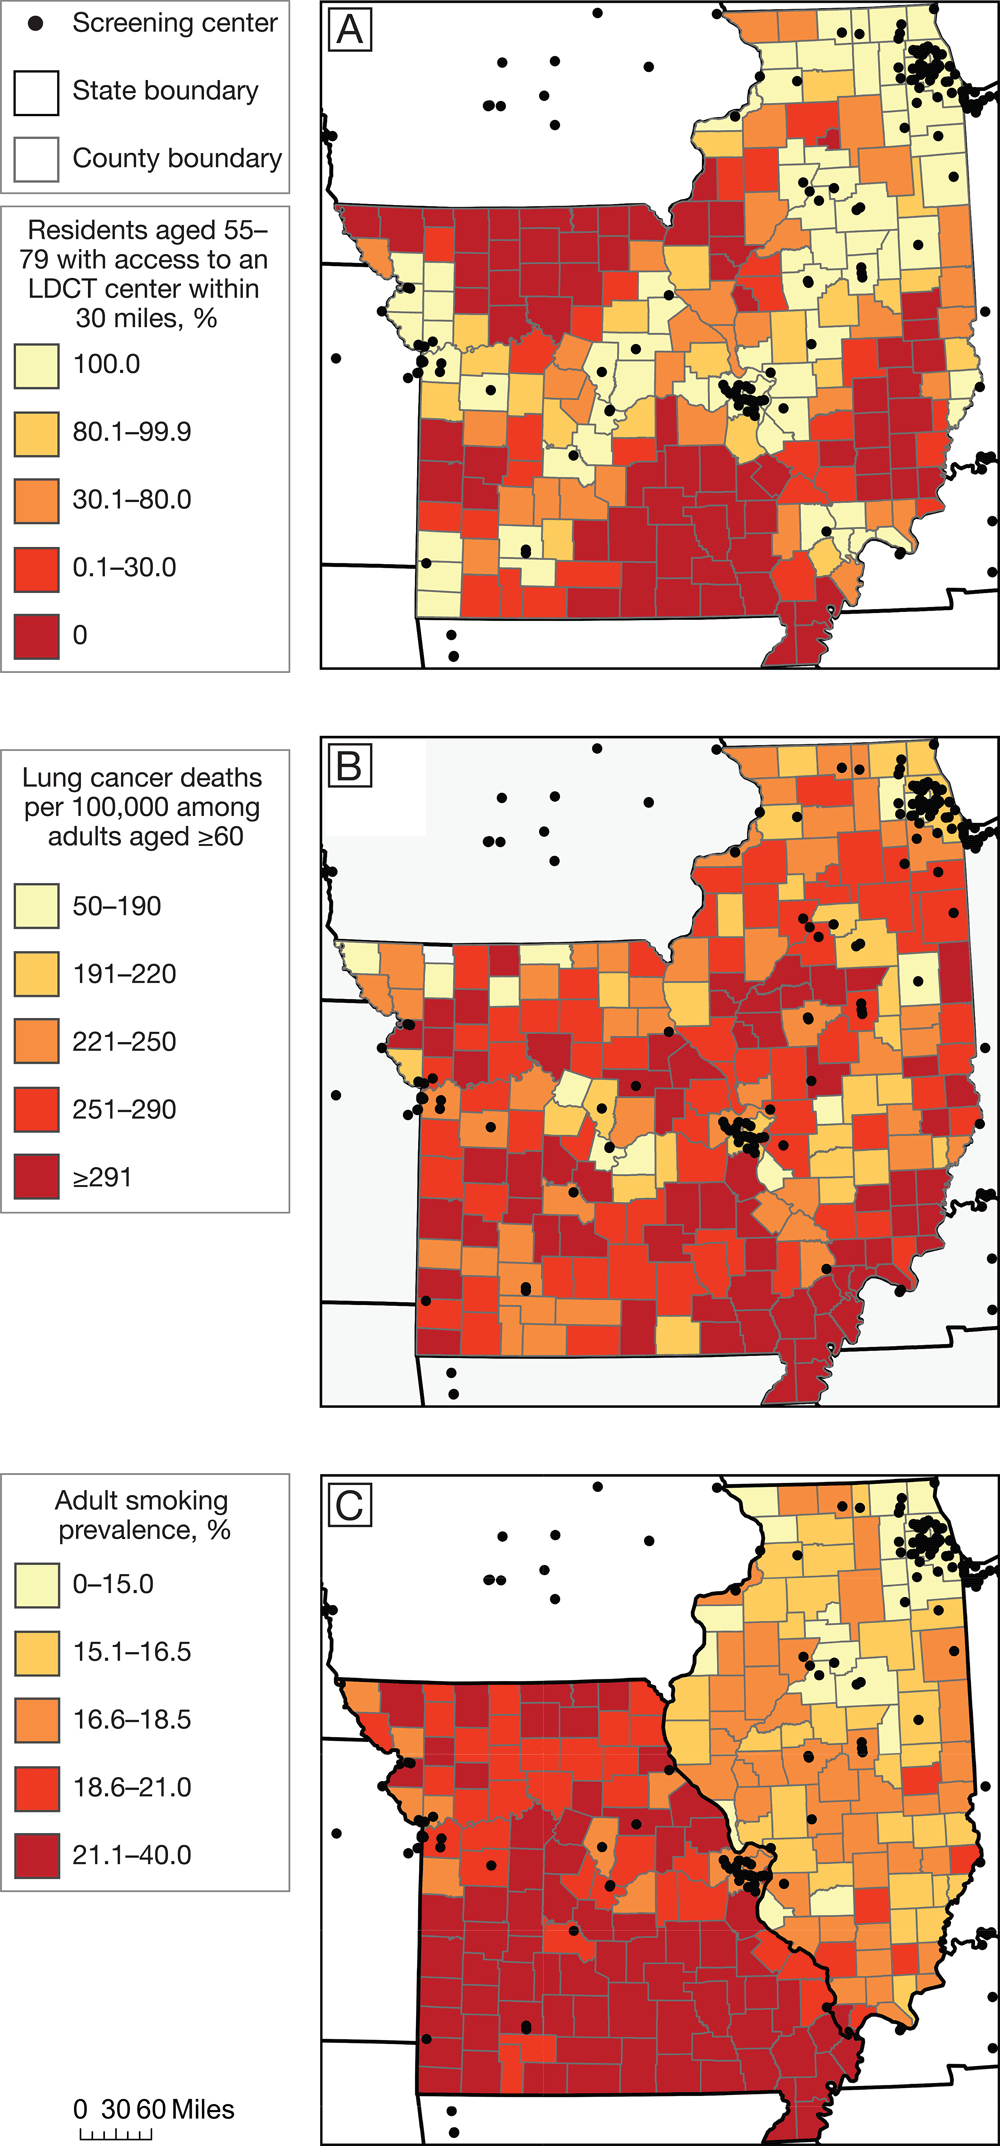 Access to LDCT lung cancer screening, lung cancer mortality, and smoking prevalence in Missouri and Illinois. A, Percentage of residents aged 55–79 with access to an LDCT lung cancer screening center within 30 miles. B, Lung cancer mortality (deaths per 100,000) among adults aged ≥60. C, Adult smoking prevalence. All maps are at the county level, and categories are based on rounded quintiles. Data obtained from American College of Radiology (11), GO2 Foundation for Lung Cancer (12), Surveillance, Epidemiology, and End Results program (18), and County Health Rankings (19). Shapefiles from ESRI (20). Abbreviation: LDCT, low-dose computed tomography